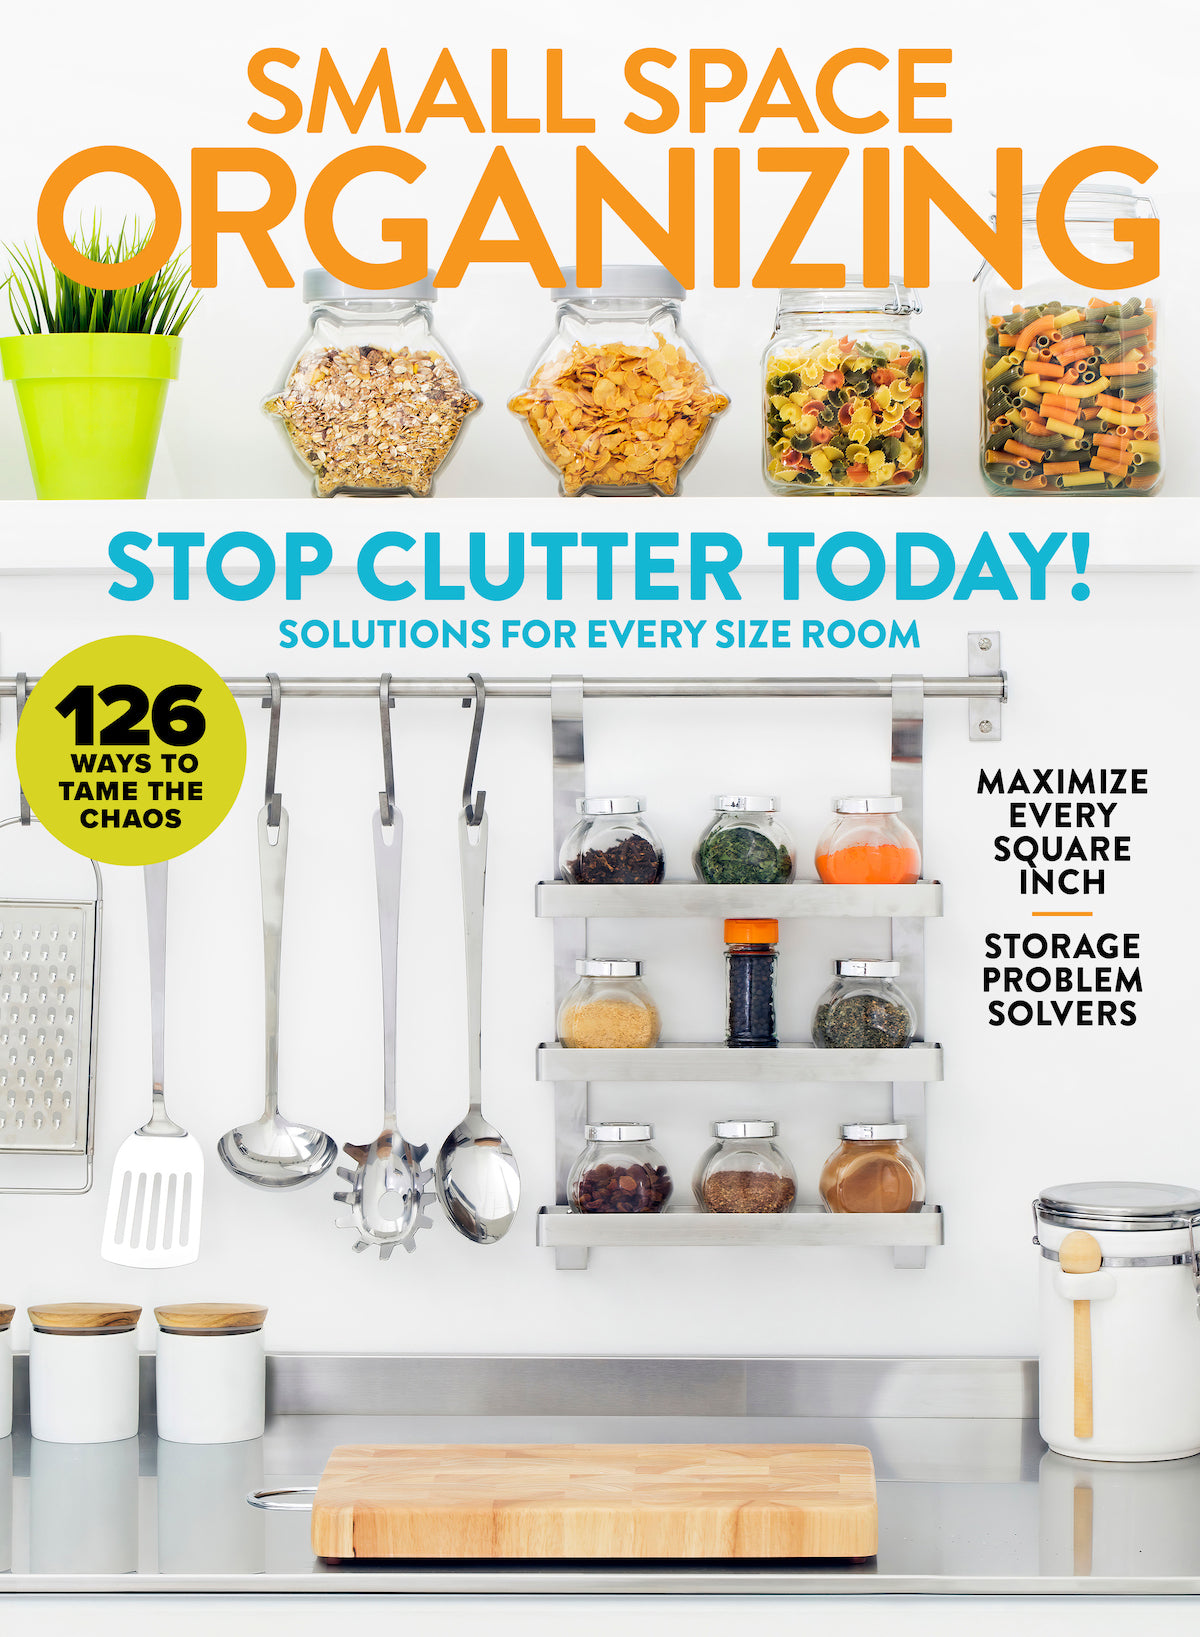 6 Simple Steps to Conquer the Kitchen Clutter - Sonoma Magazine